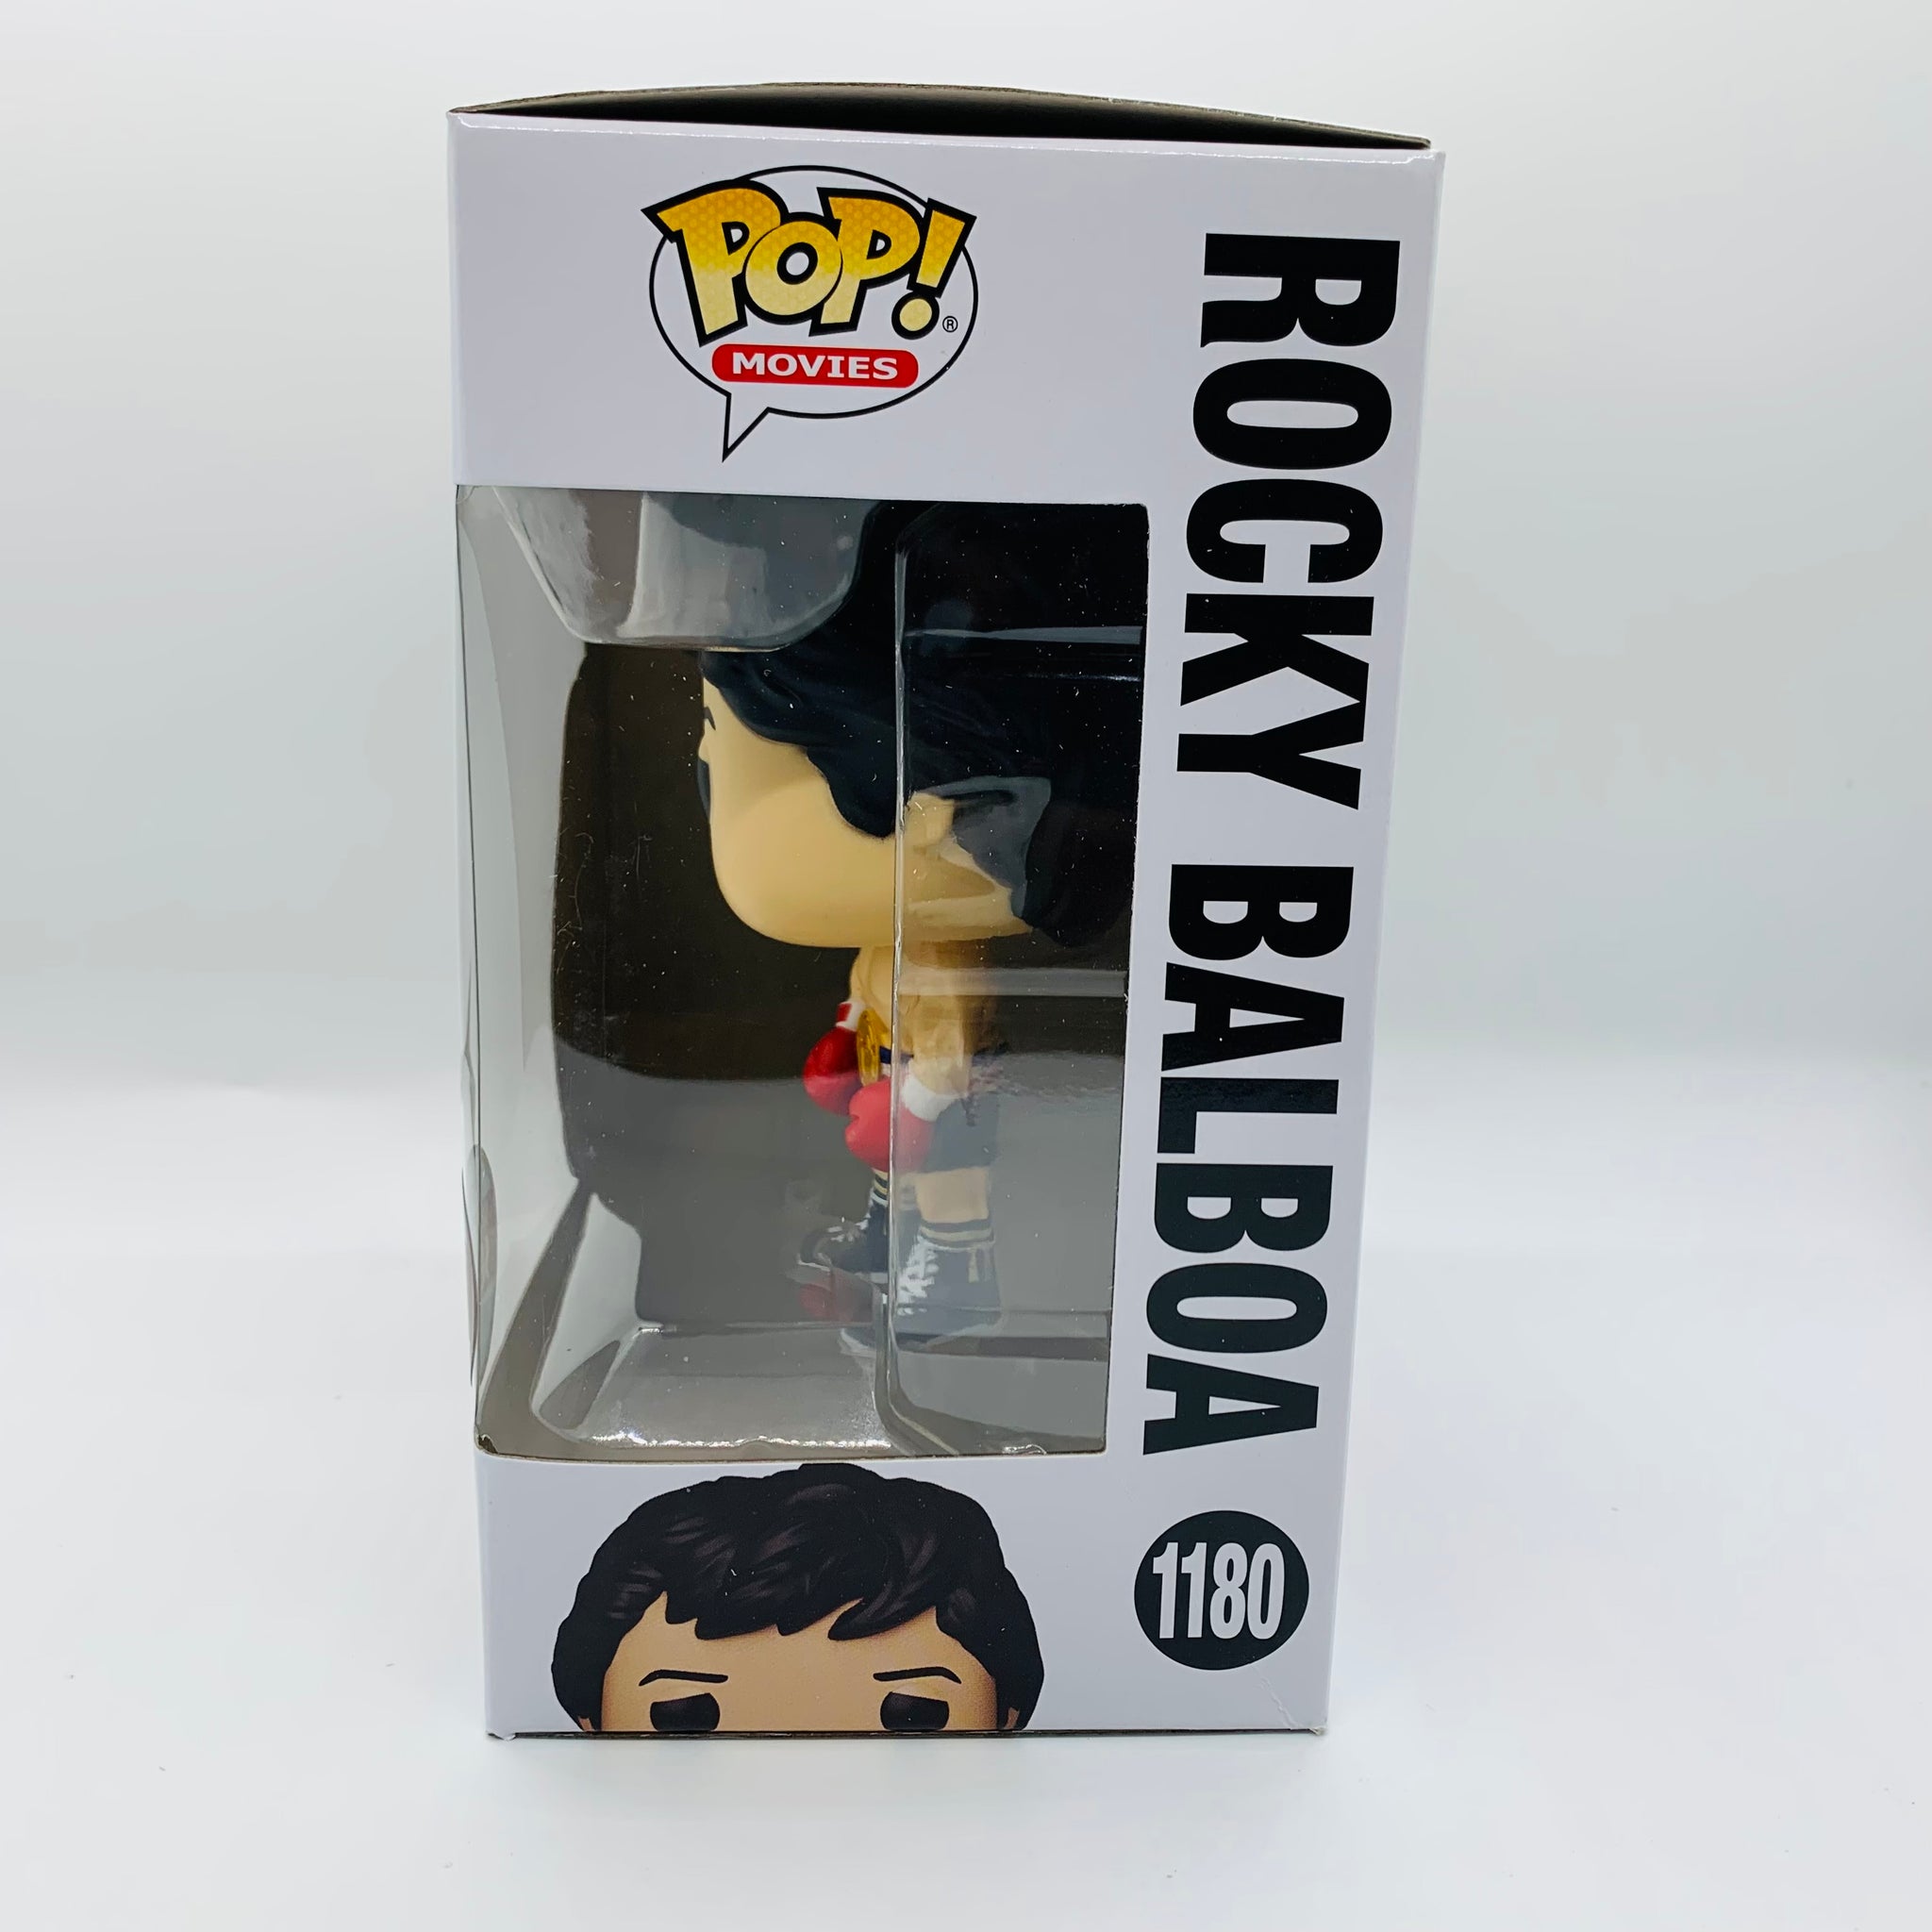 Funko Pop Movies Rocky 45th Rocky Balboa (1177) Unboxing Review 